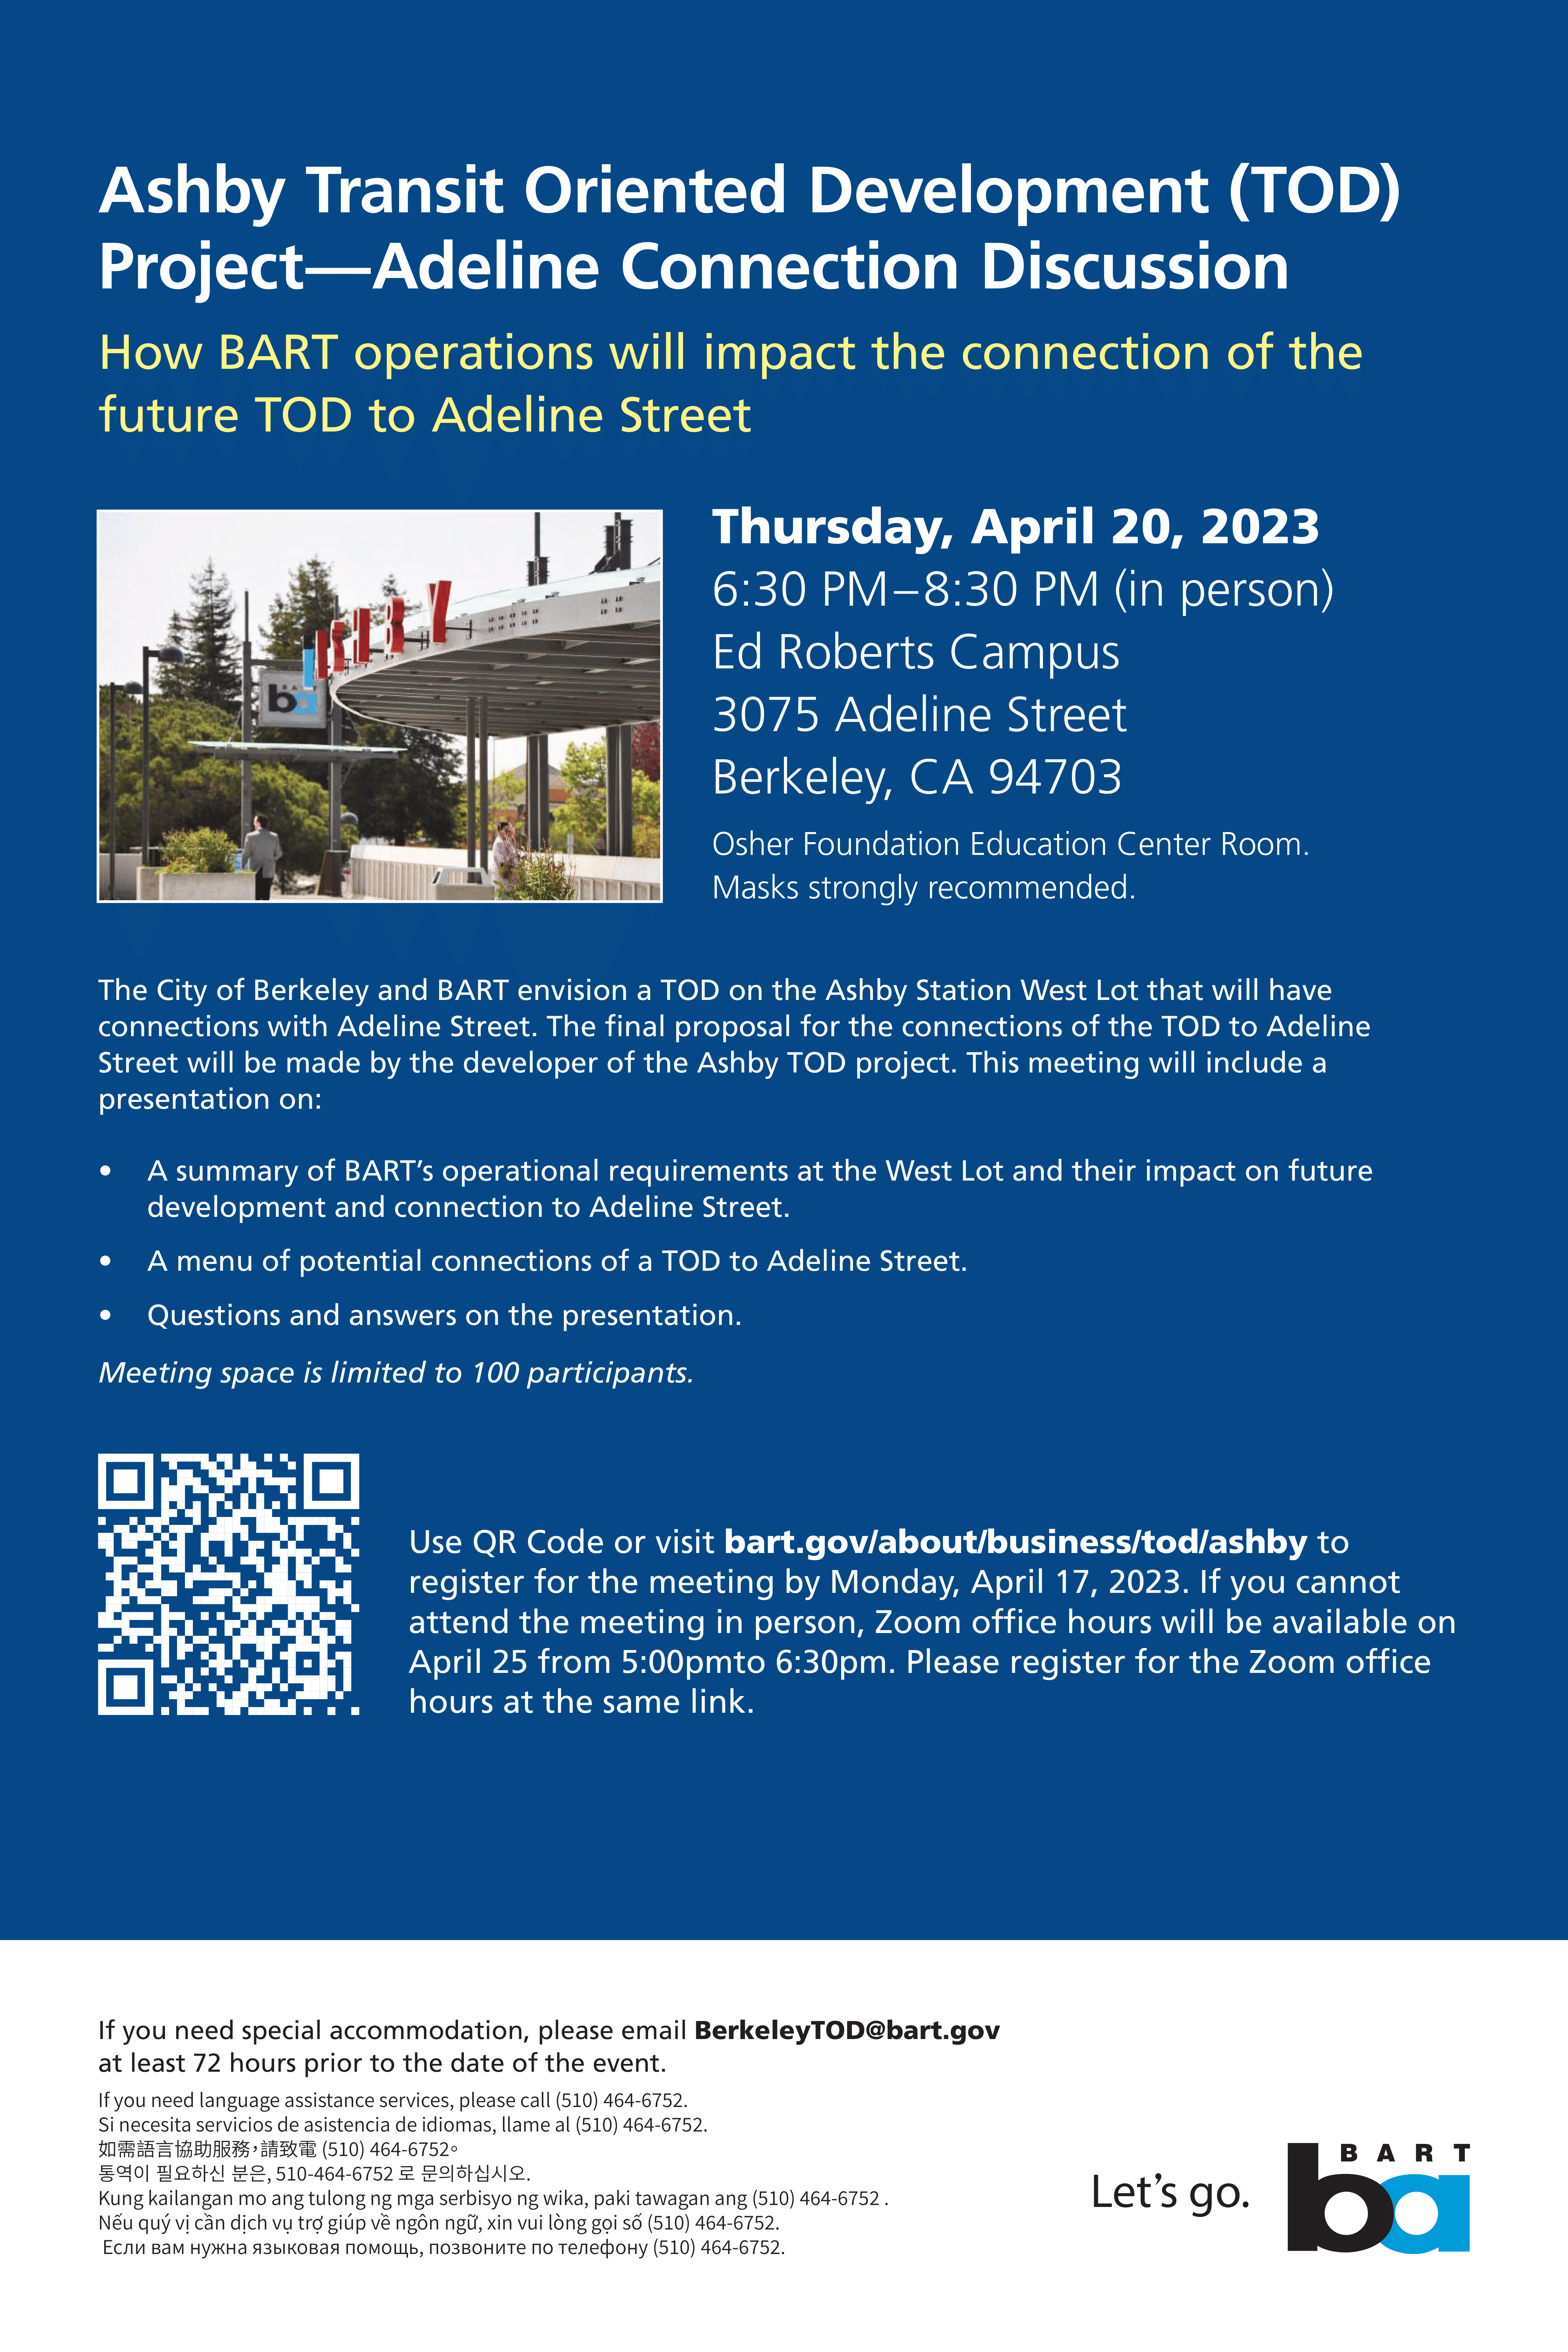 Ashby Transit Oriented Development (TOD) Project—Adeline Connection Discussion flyer